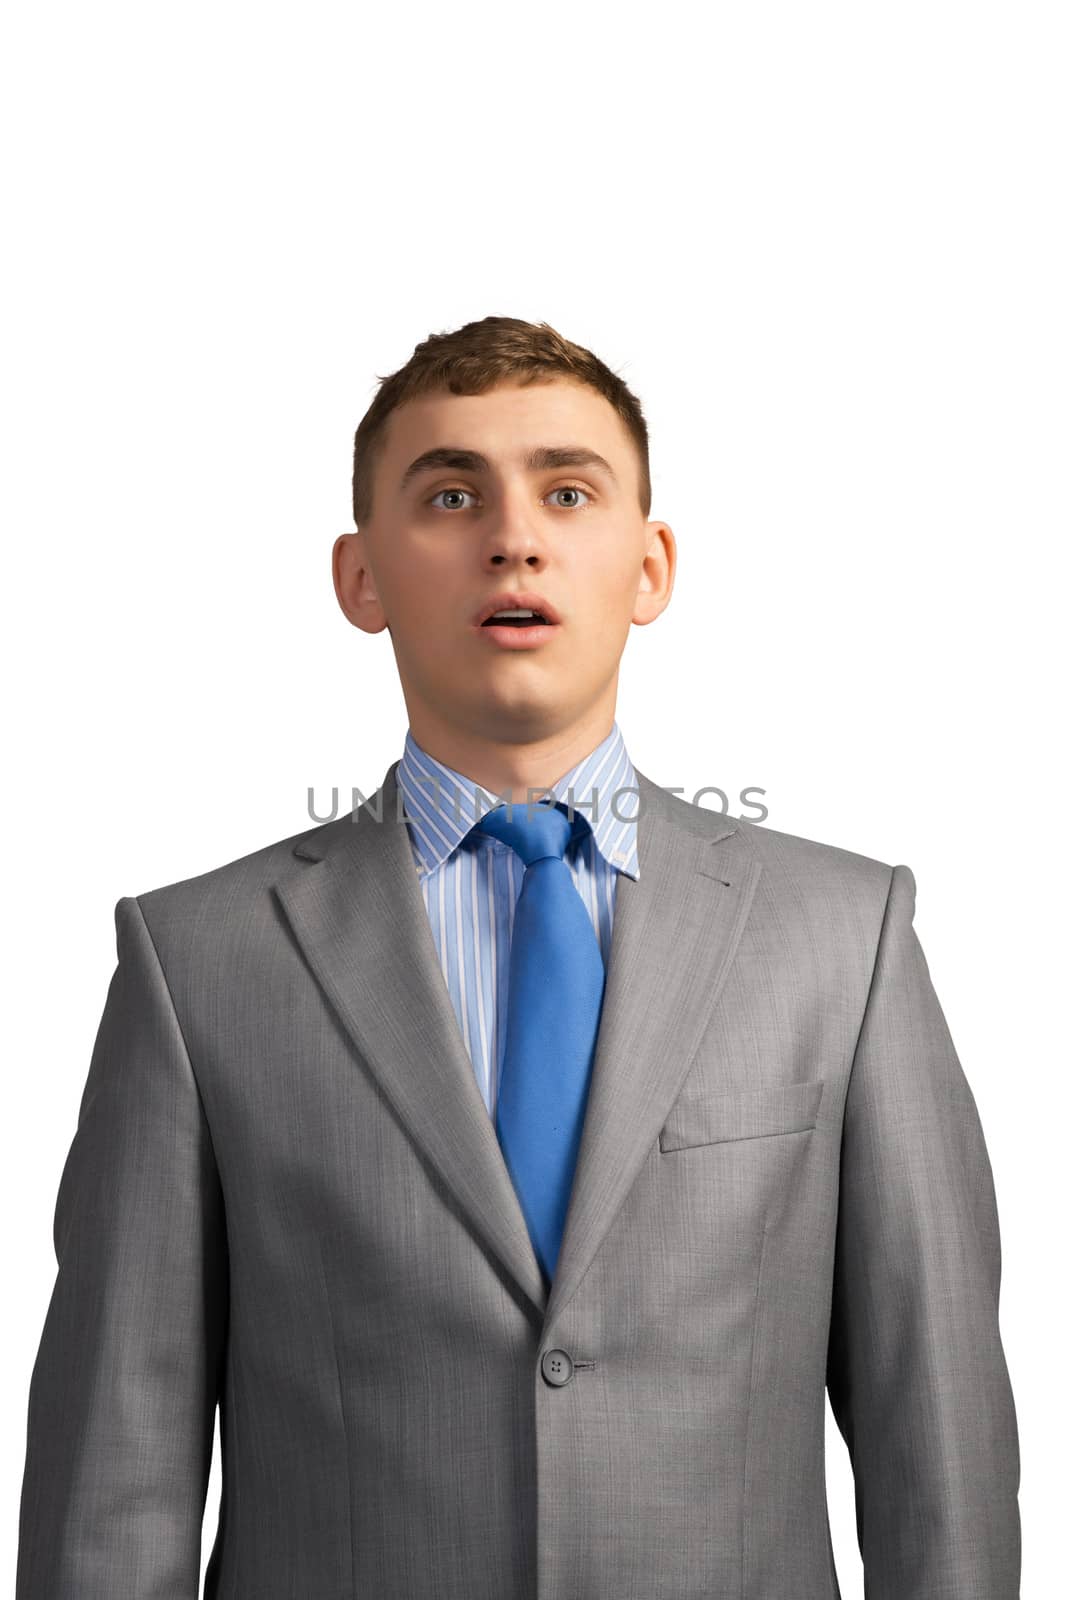 portrait of a young businessman by adam121